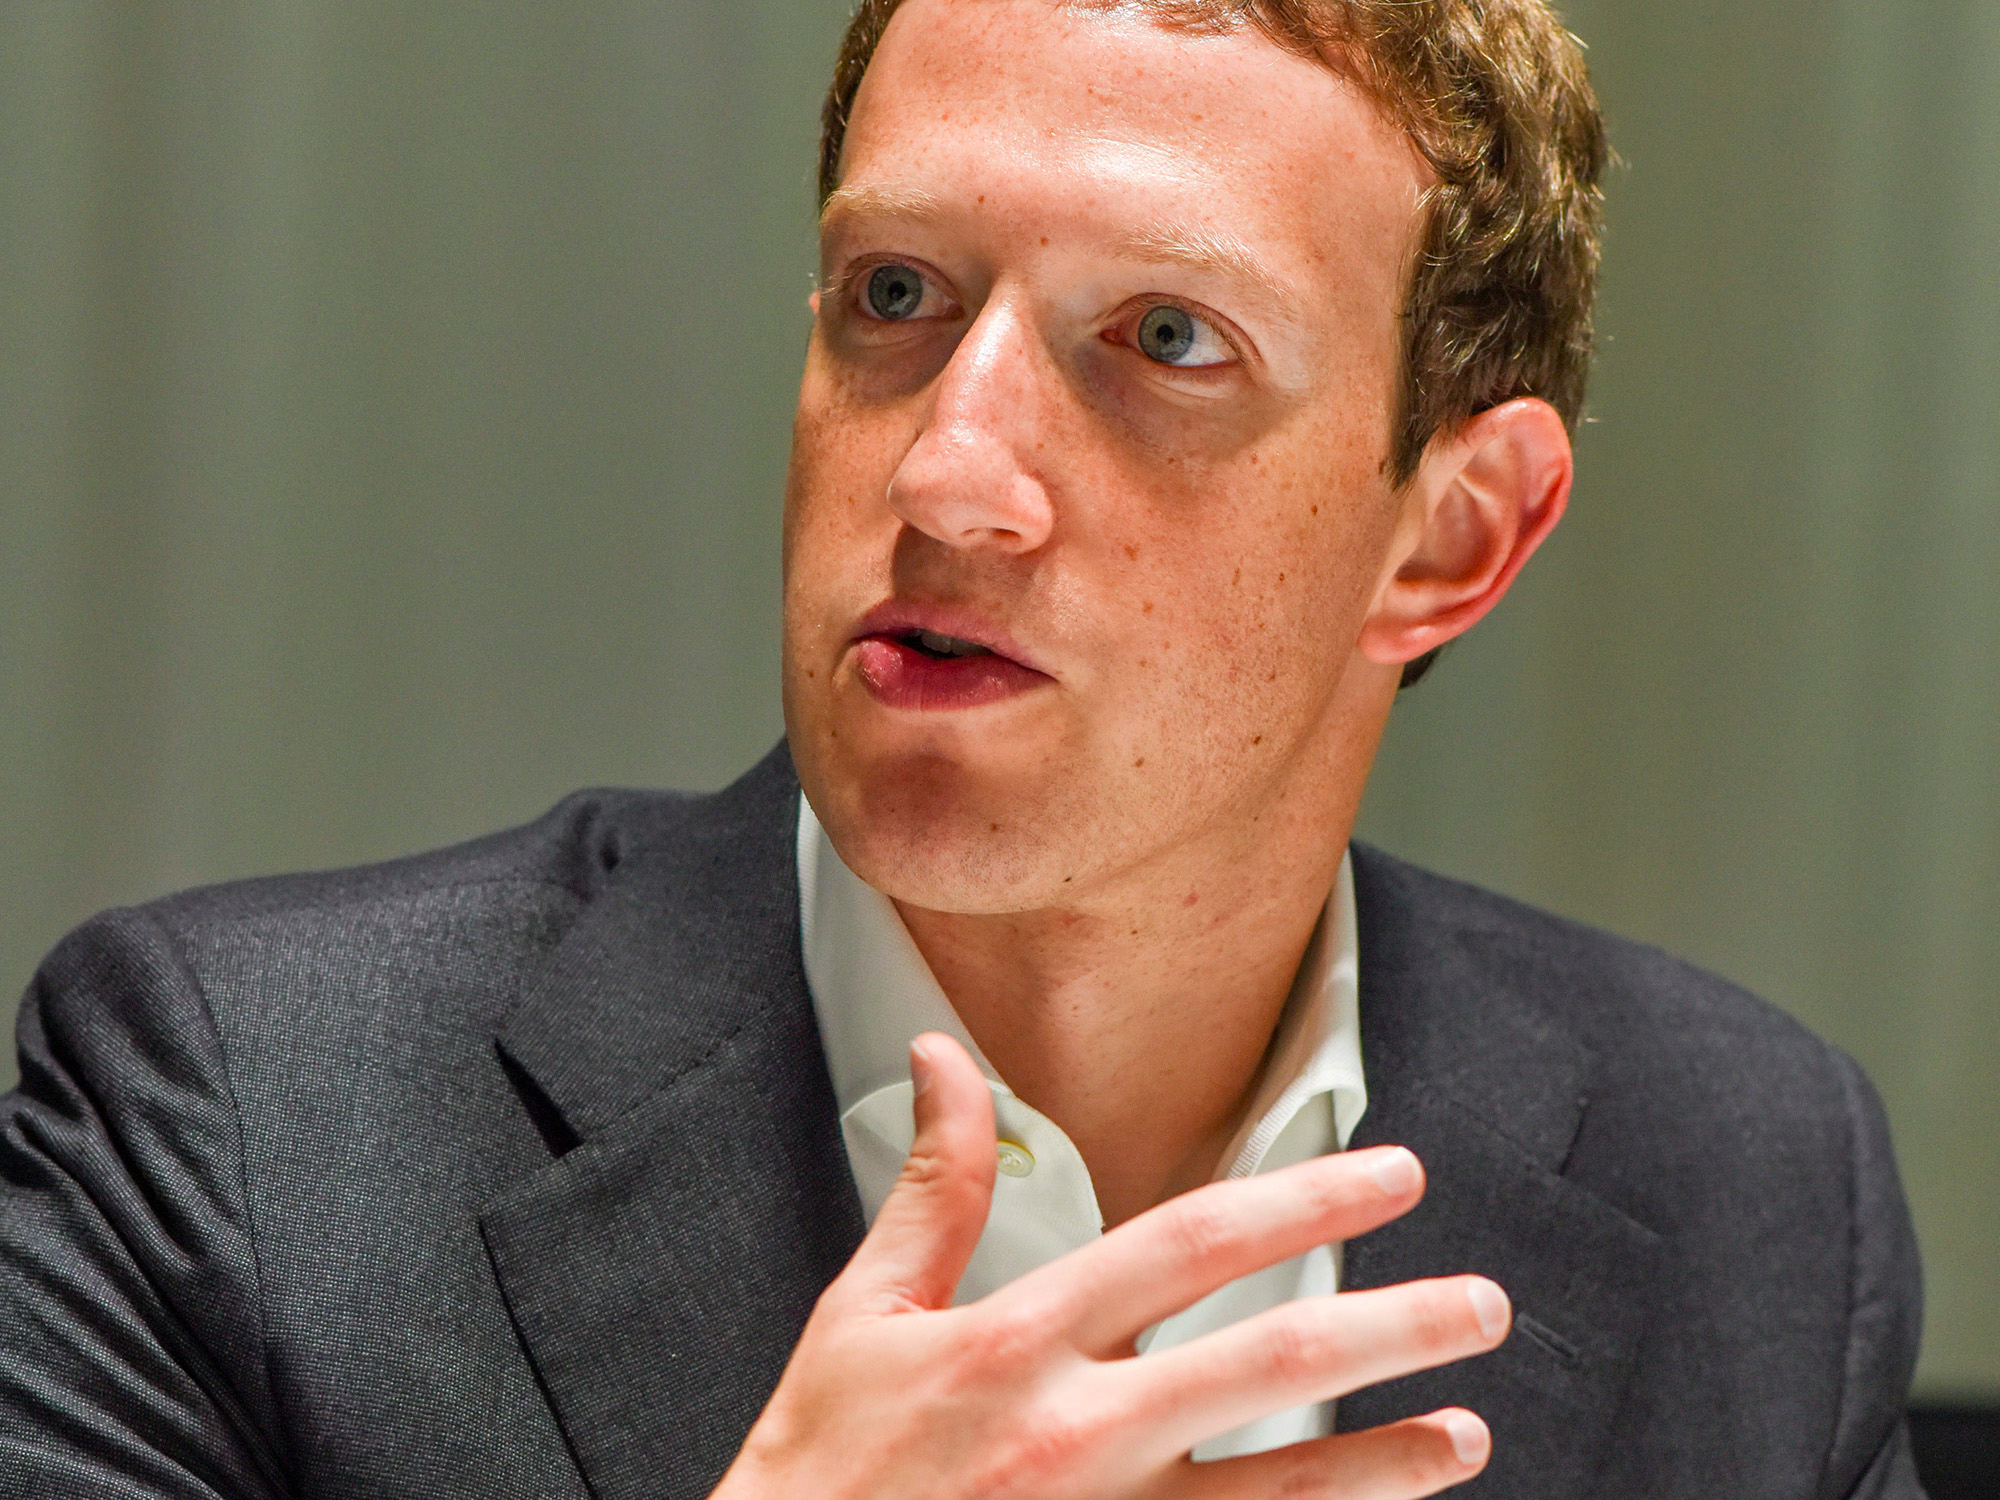 mark-zuckerberg-we-shouldnt-worry-about-ai-overtaking-humans-unless-we-really-mess-something-up